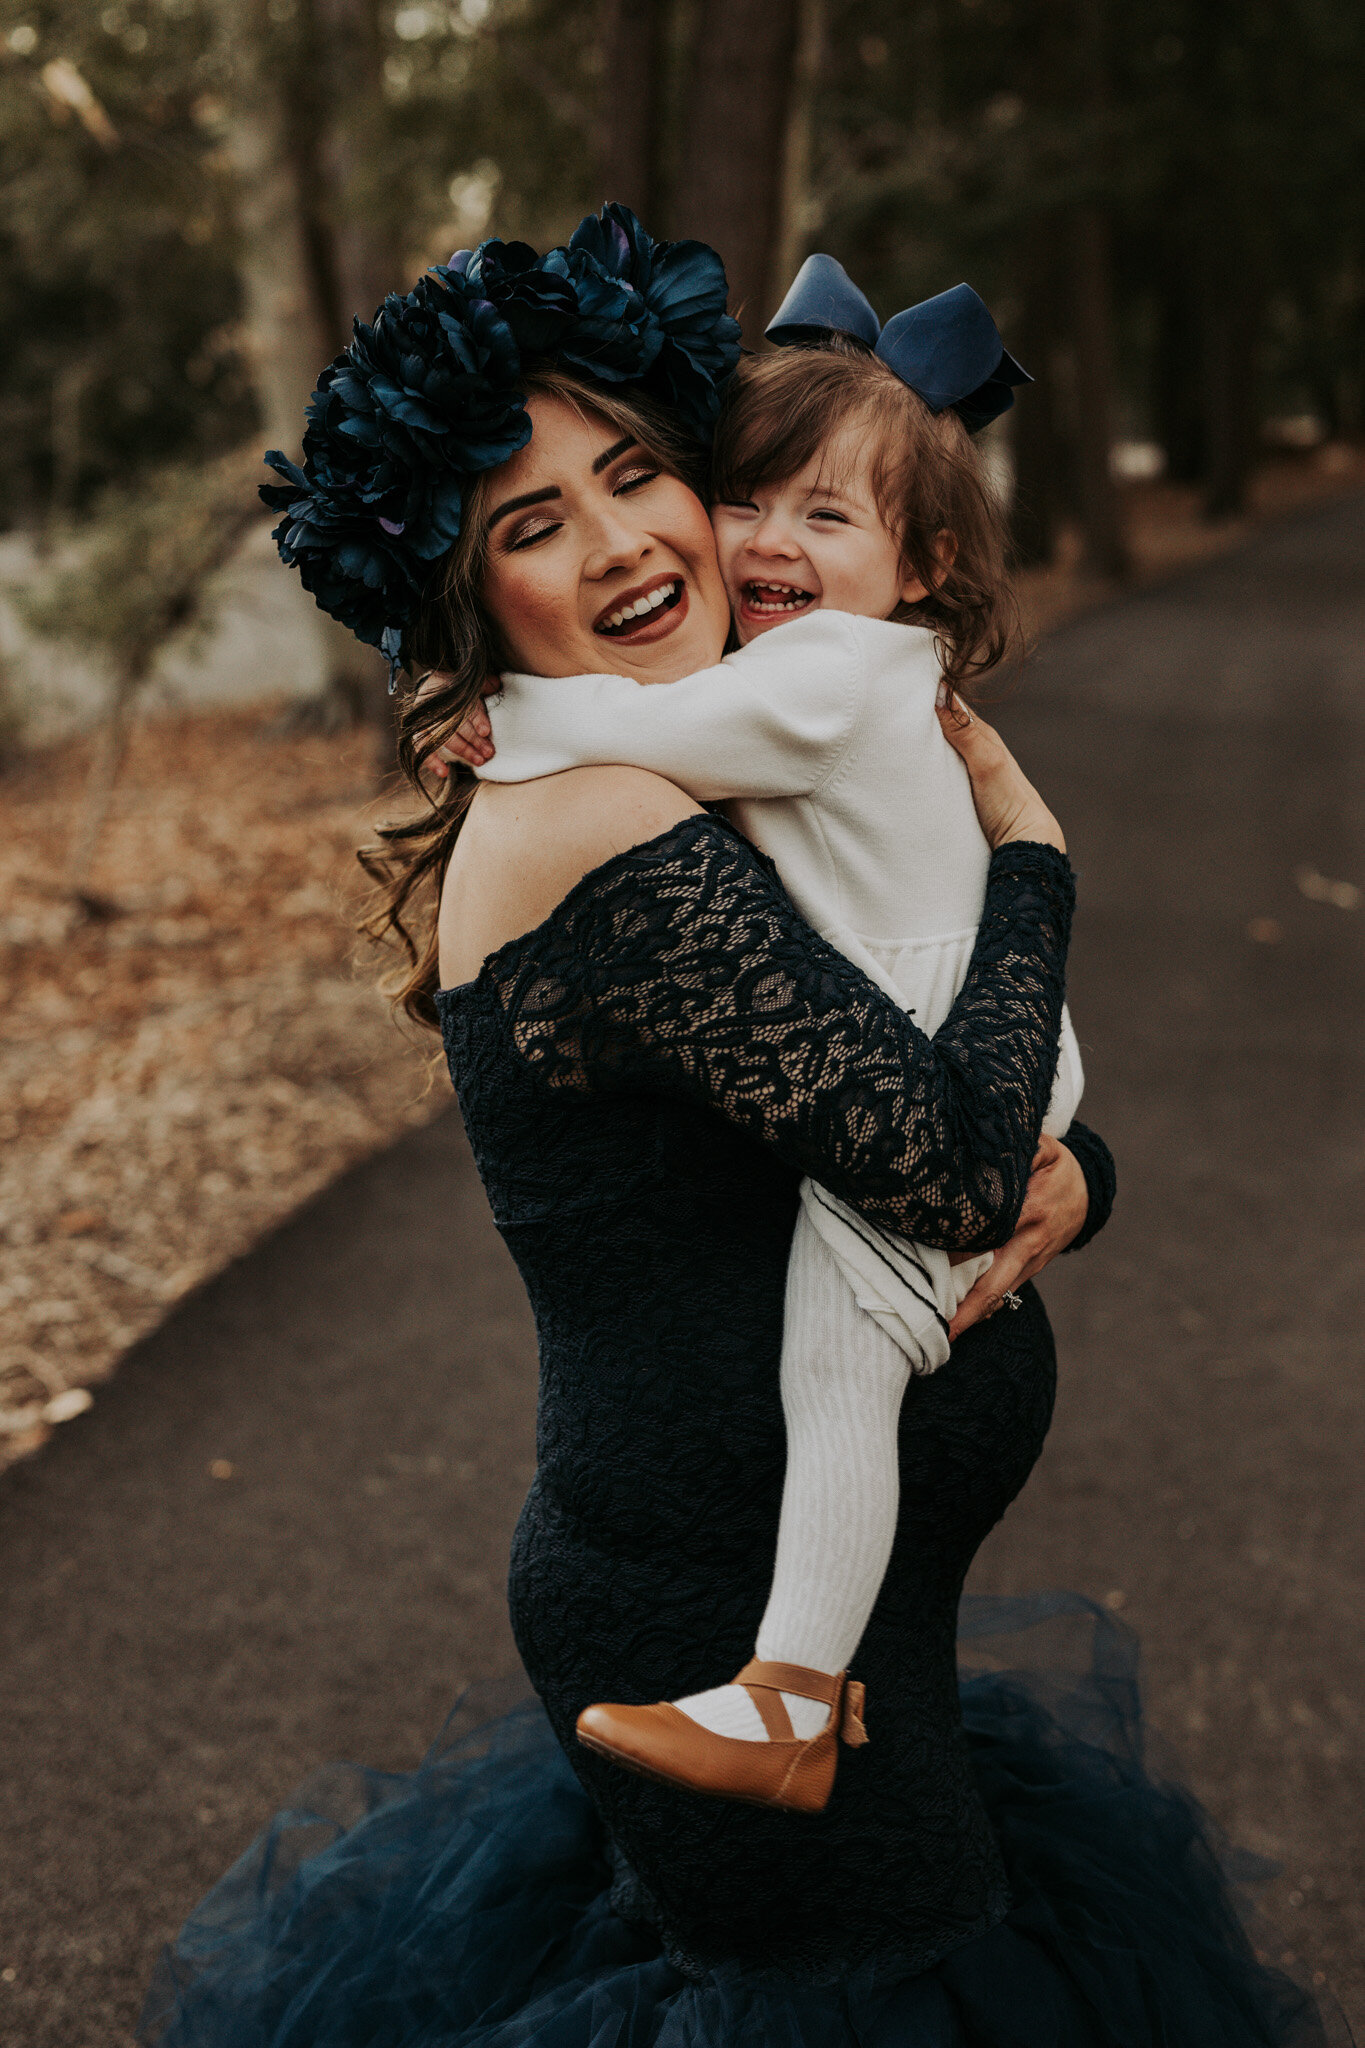 Blue_Tulle_Materntiy_Dress_Fashion_Lace_Baby_Boy_Mom_to_Be_Mill_Creek_Park_Lantermand_Mill_Spring_2021_by_Newbron_Photographer_Christie_Leigh_Photo_Mahoning_COunty_Ohio_OH-1.jpg